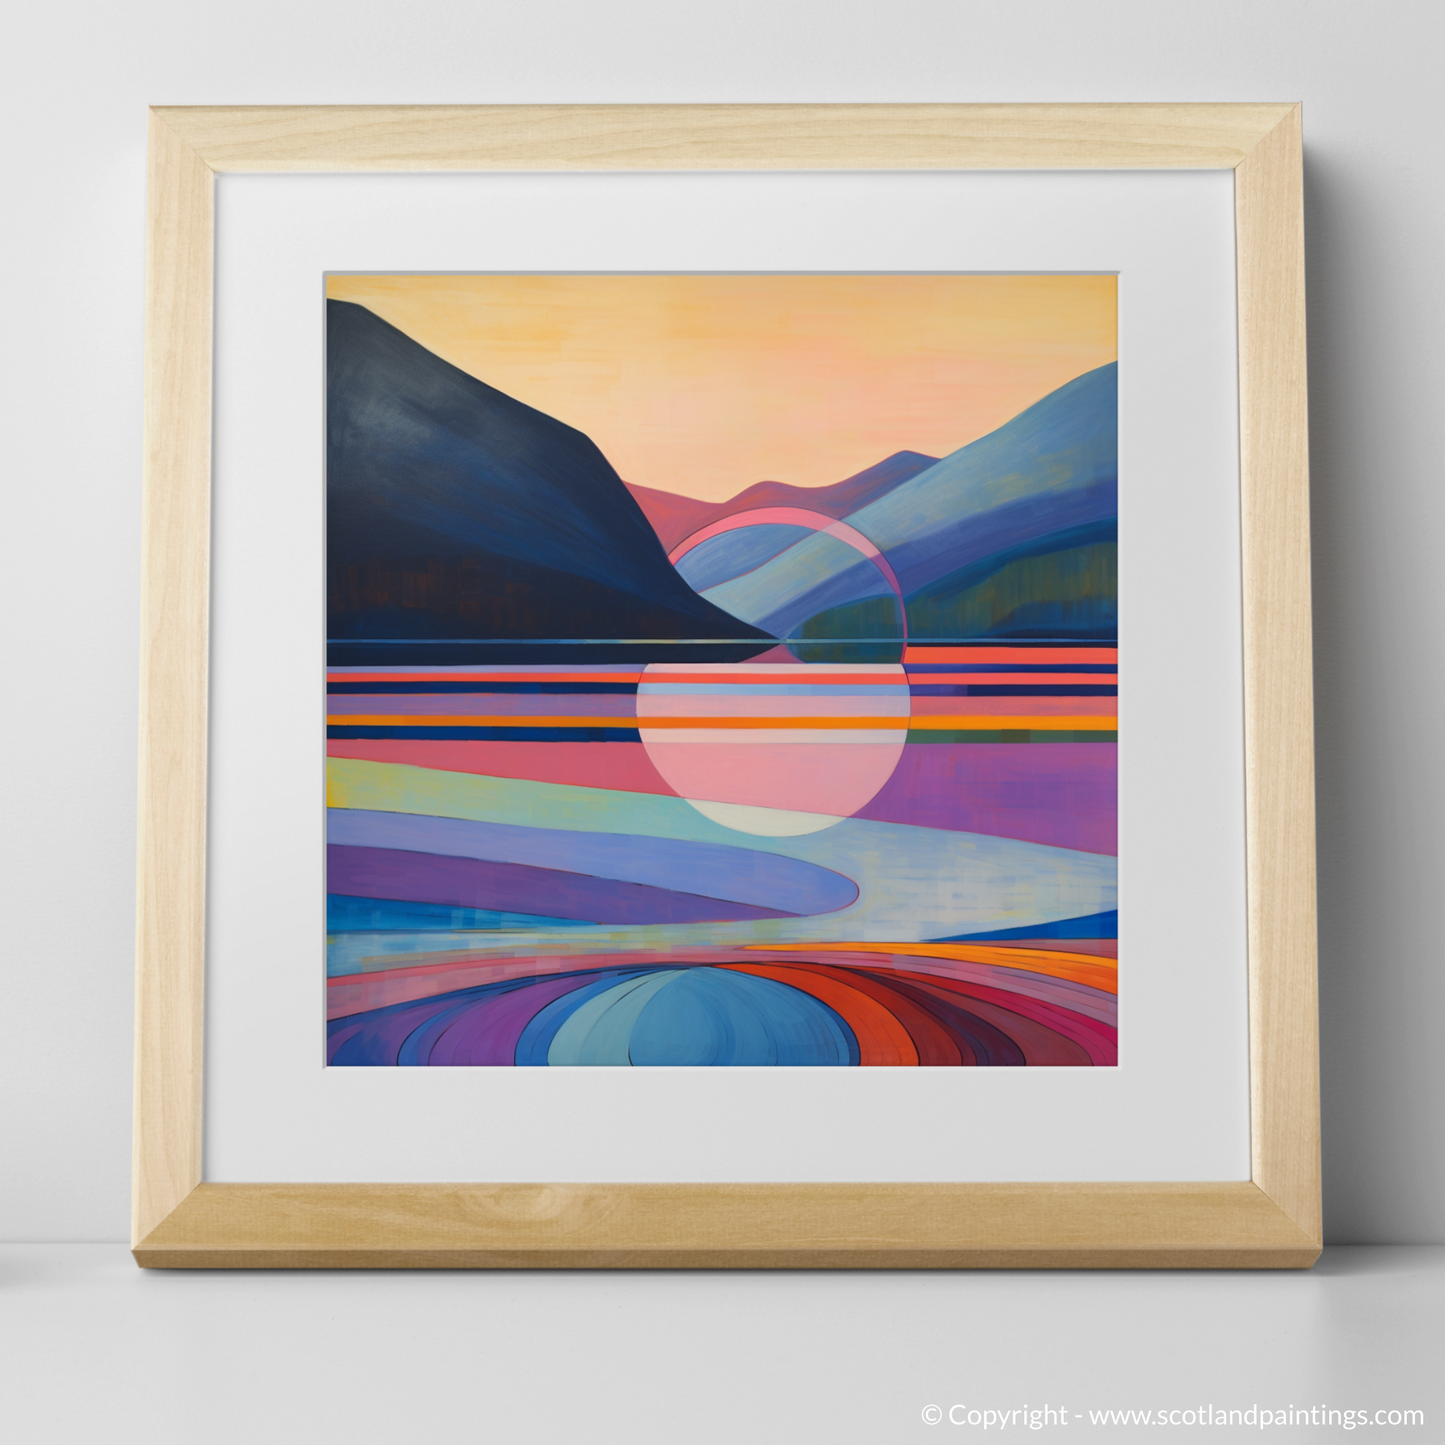 Loch Earn Abstraction: A Color Field Reverie